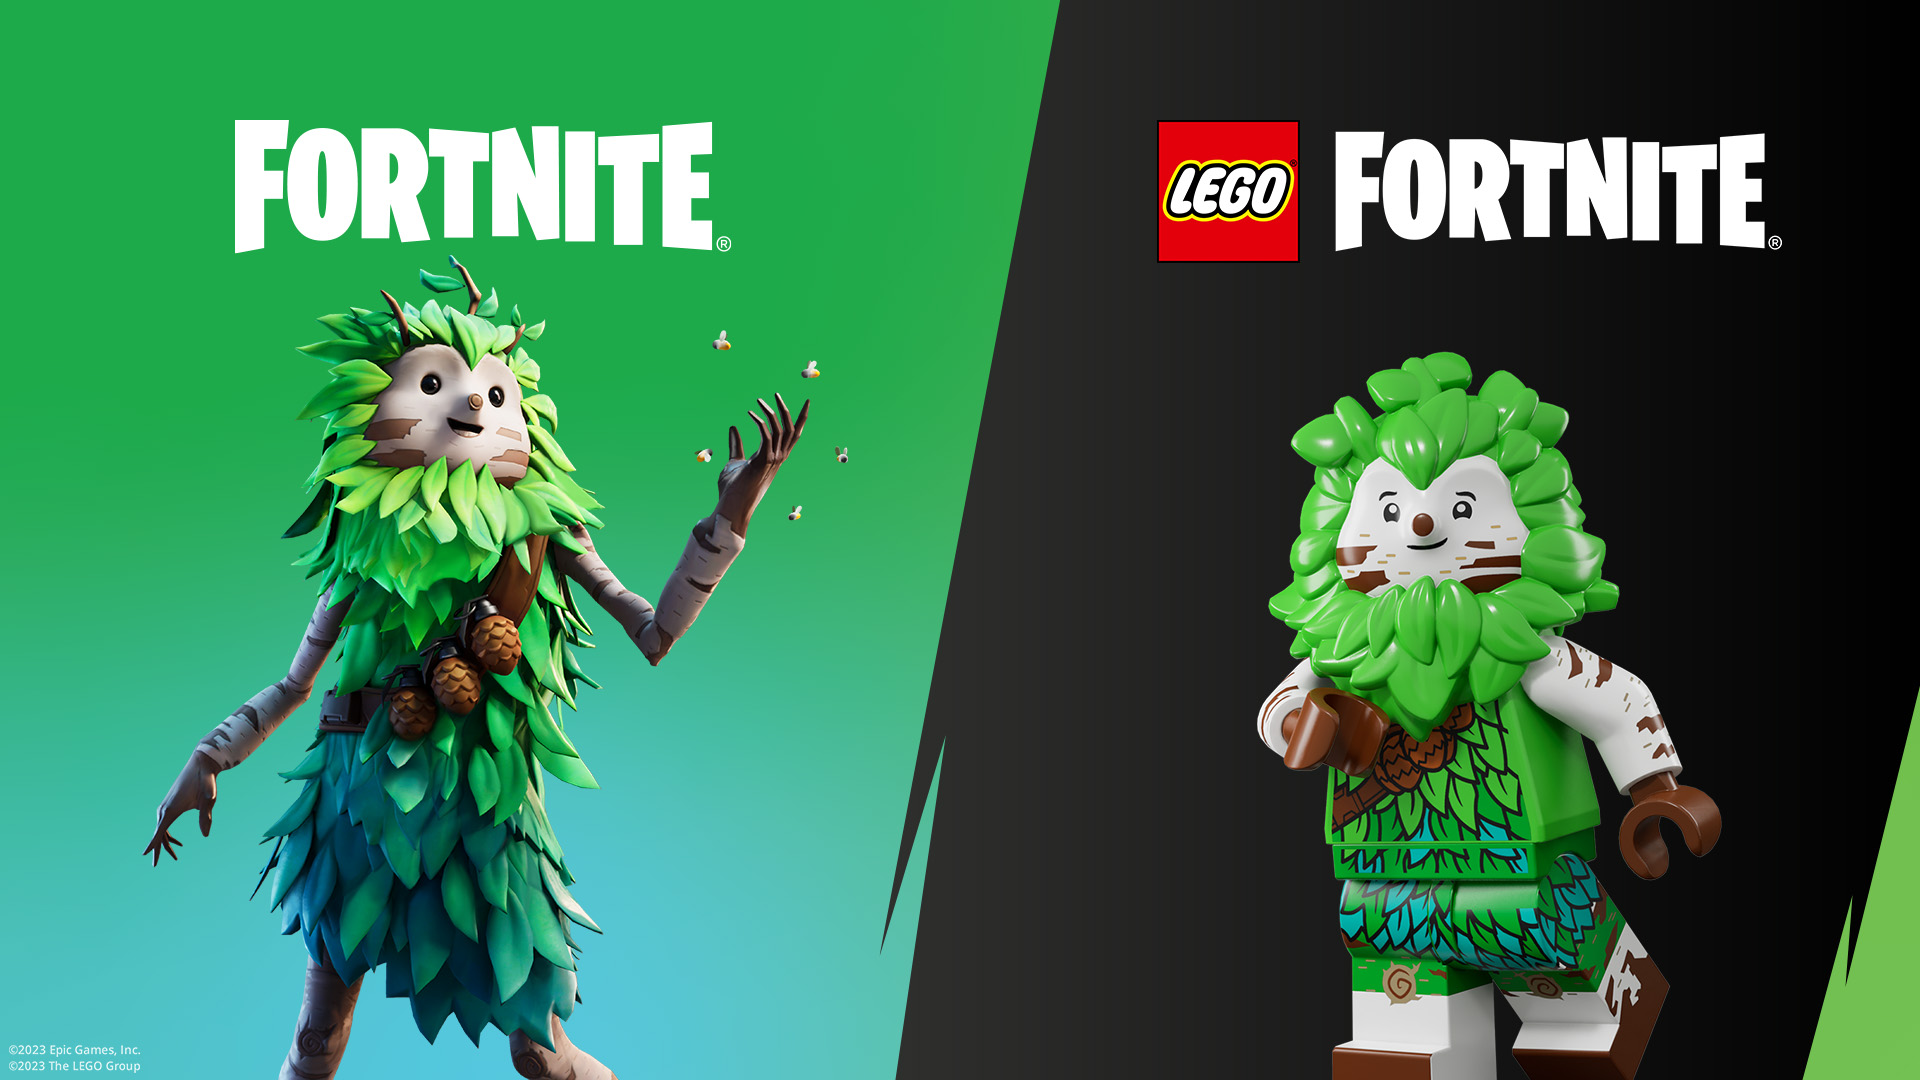 Fortnite Style and LEGO Style